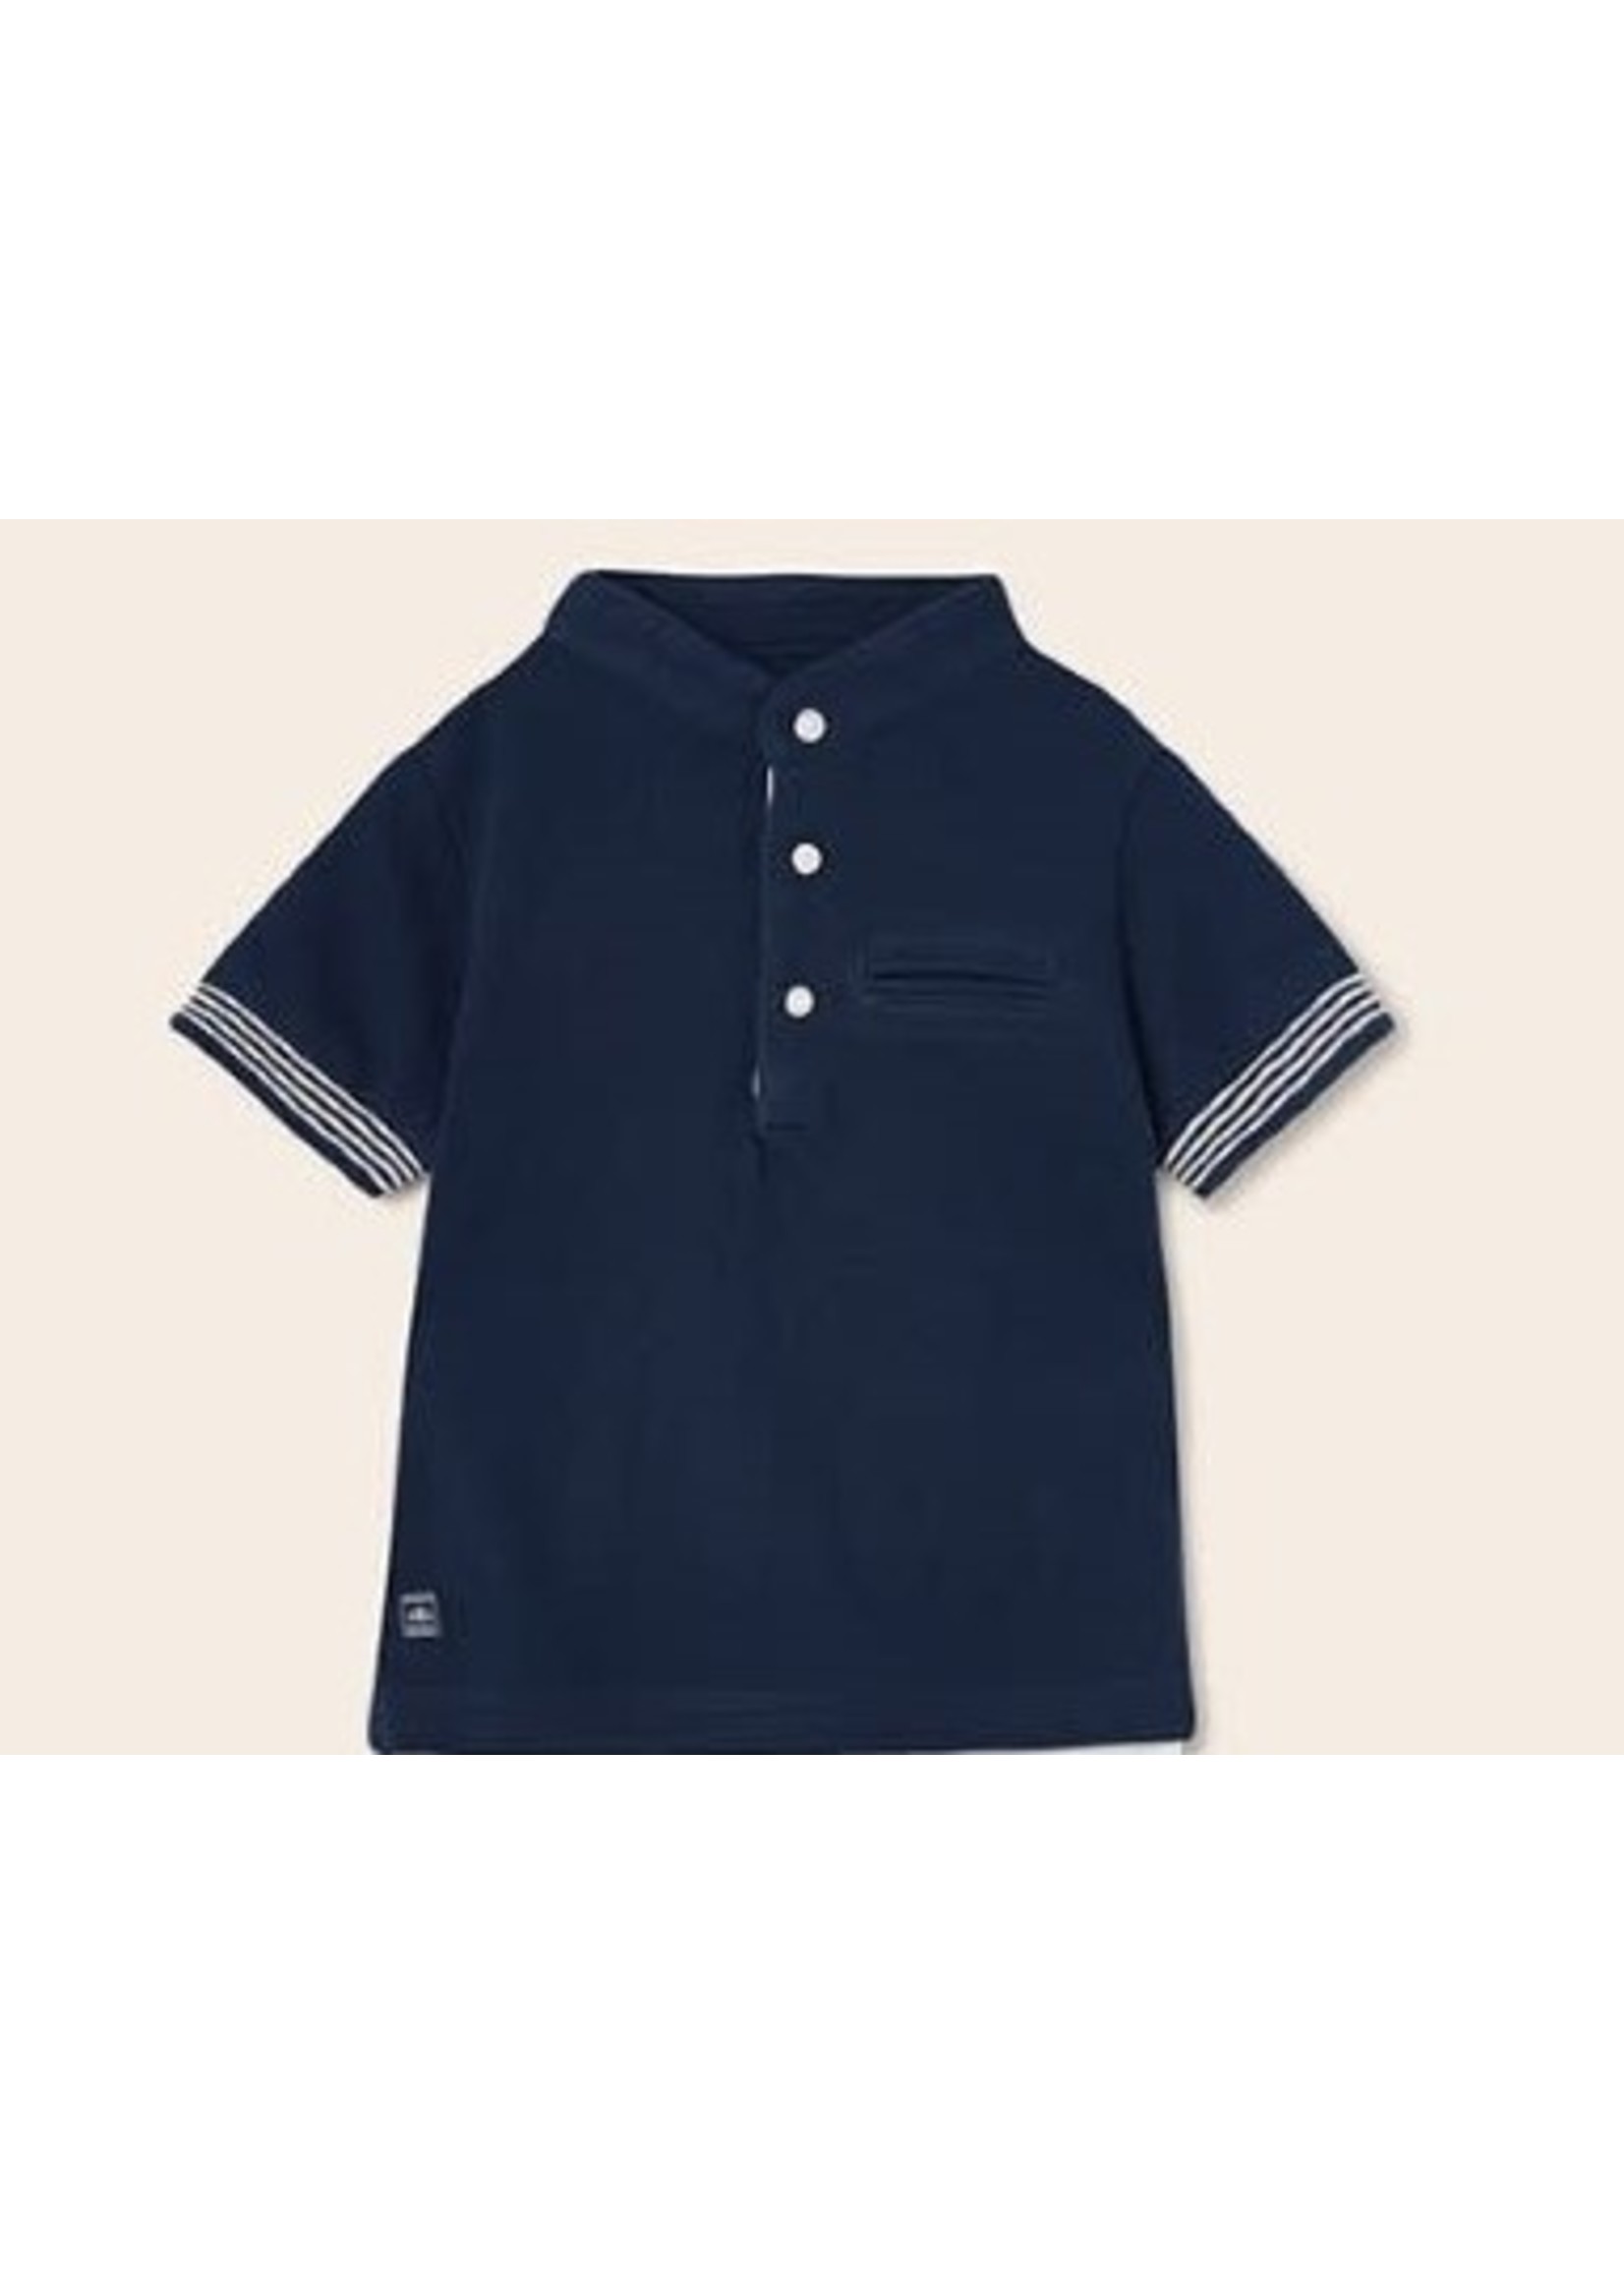 Mayoral Mayoral S/s polo blue